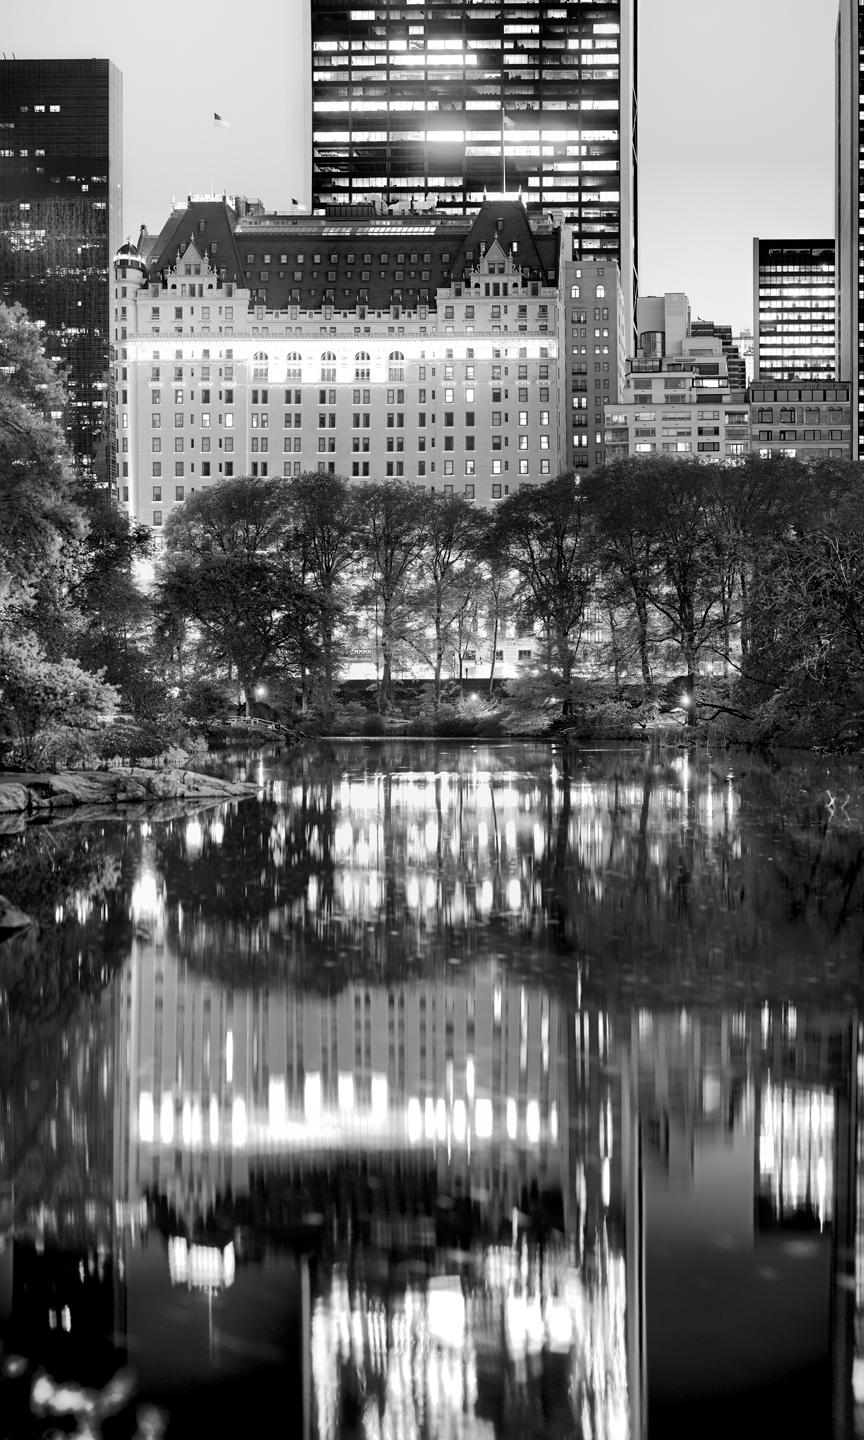 Jeff Chien-Hsing Liao Landscape Photograph – Central Park, New York City Black and White Photograph, Pond and Reflection